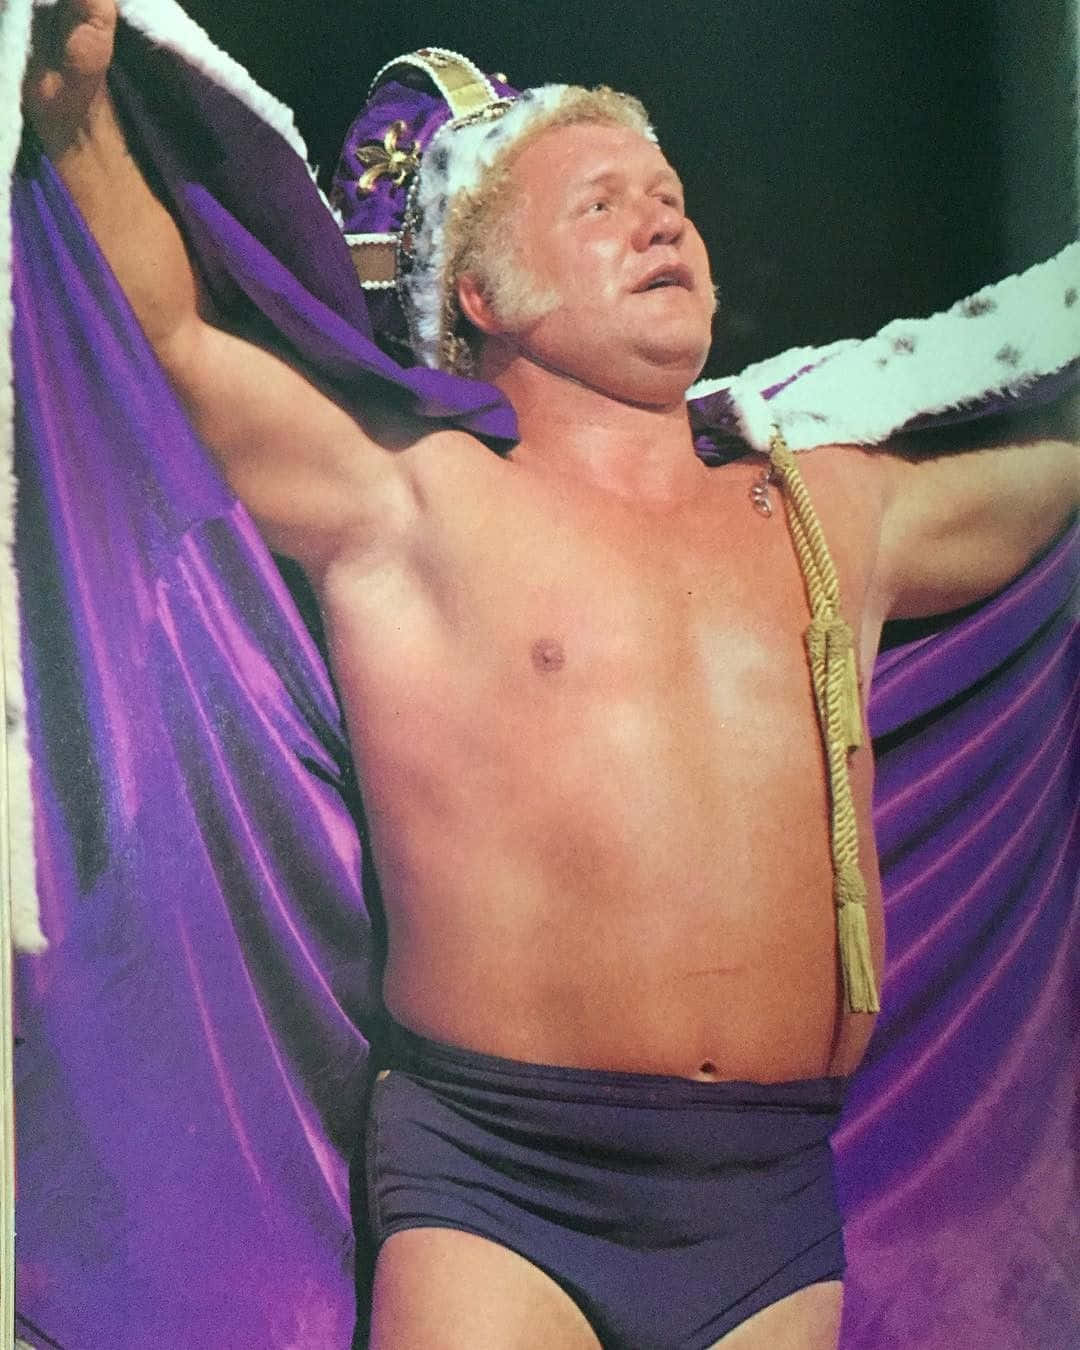 The King of Wrestling, Harley Race Wearing his Signature Purple Cape and Crown Wallpaper